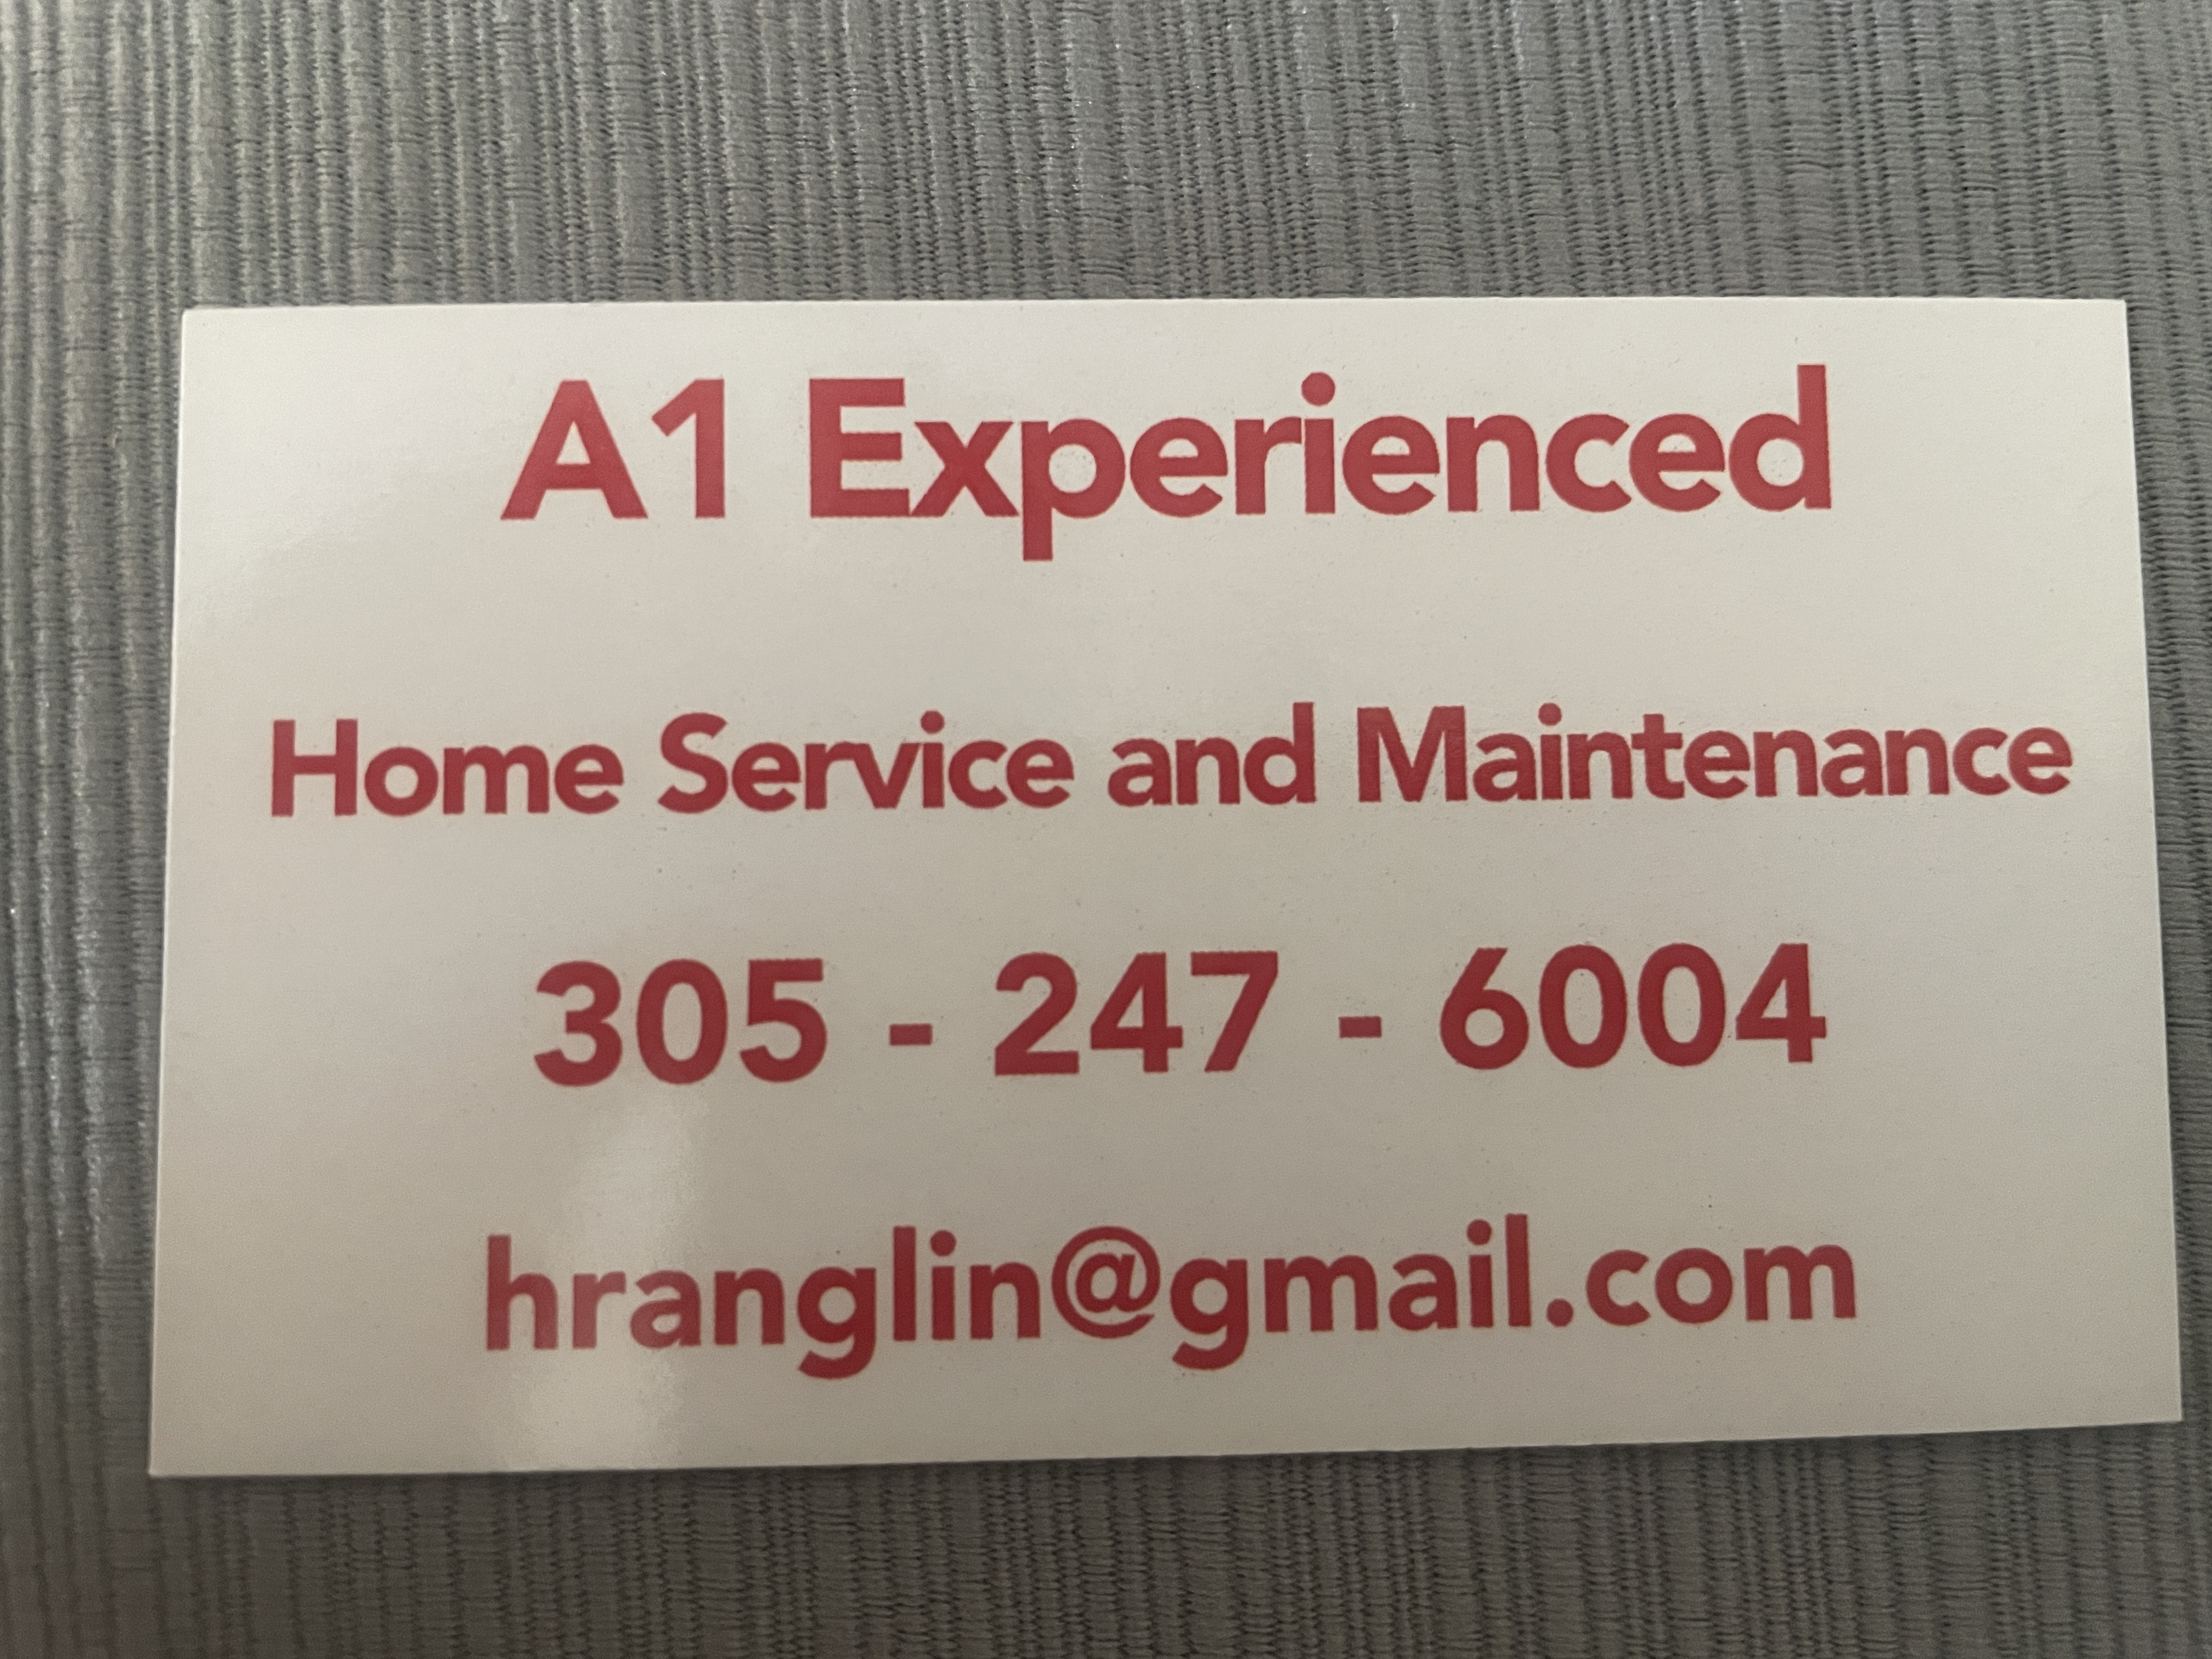 A1 Experience Home Service and Maintenance Logo